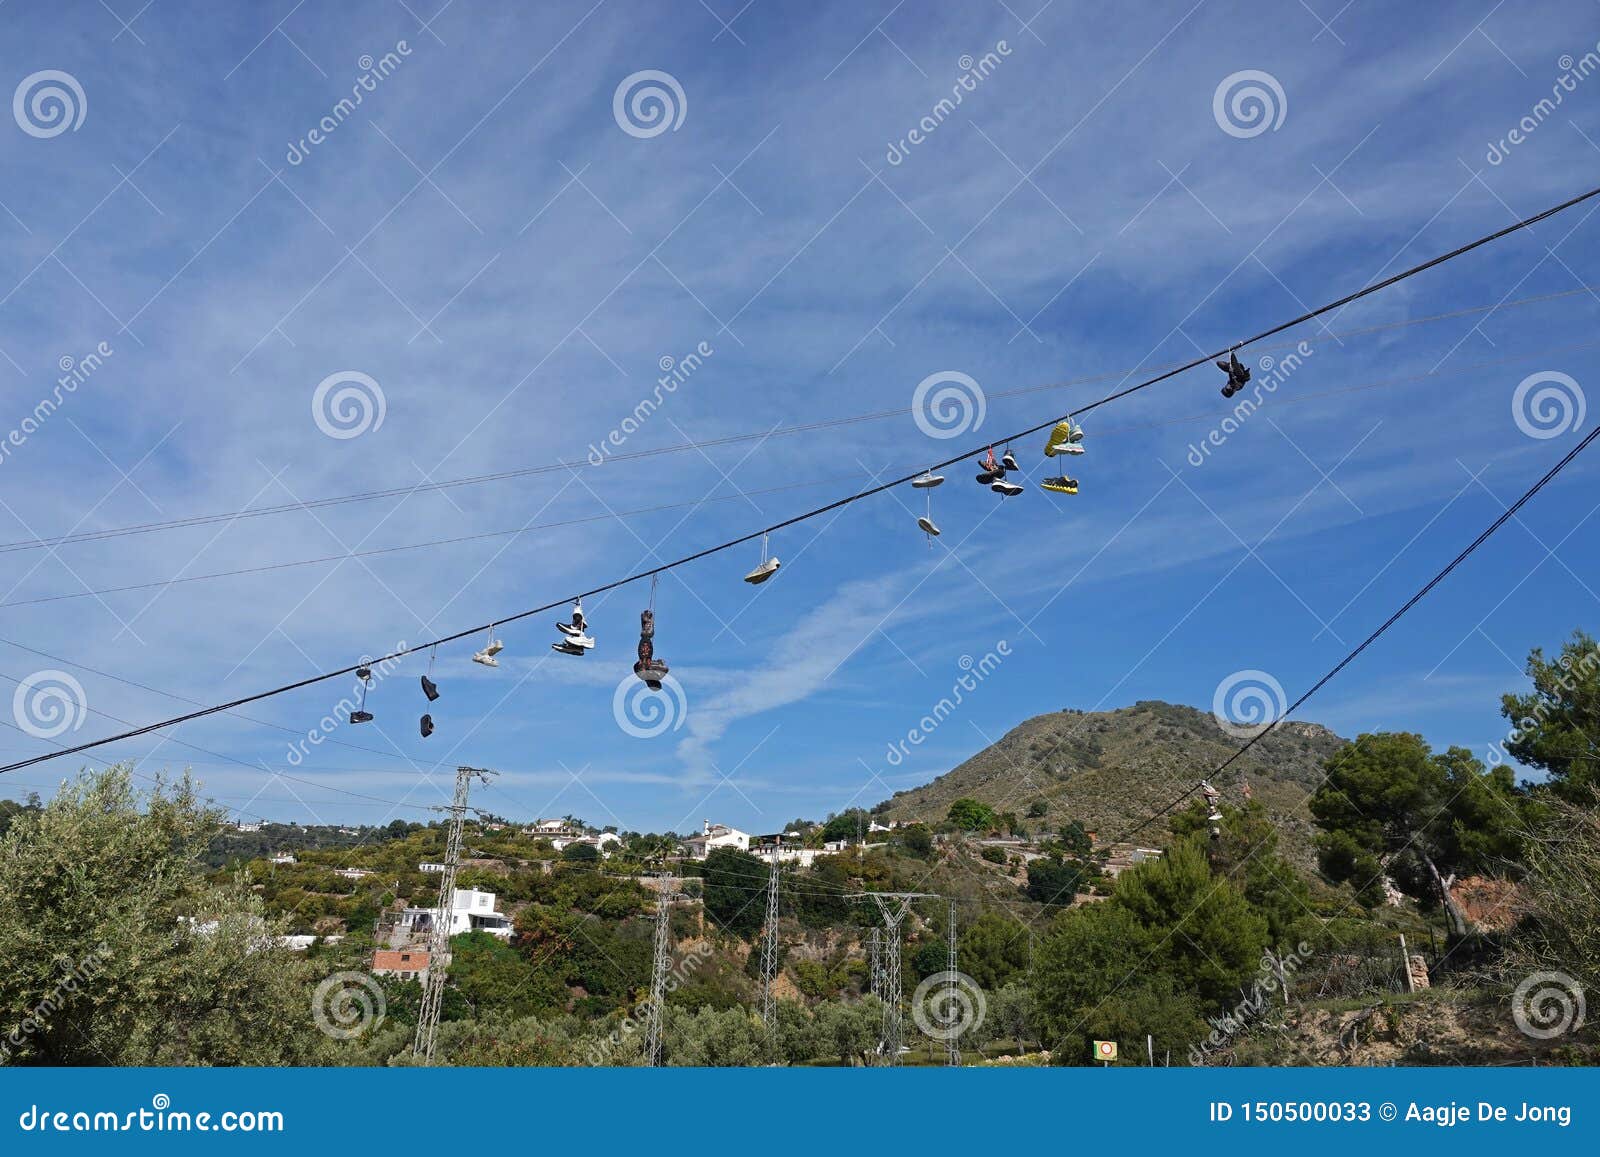 abandonned shoes at rio chillar walk in nerja in andalusia, spain